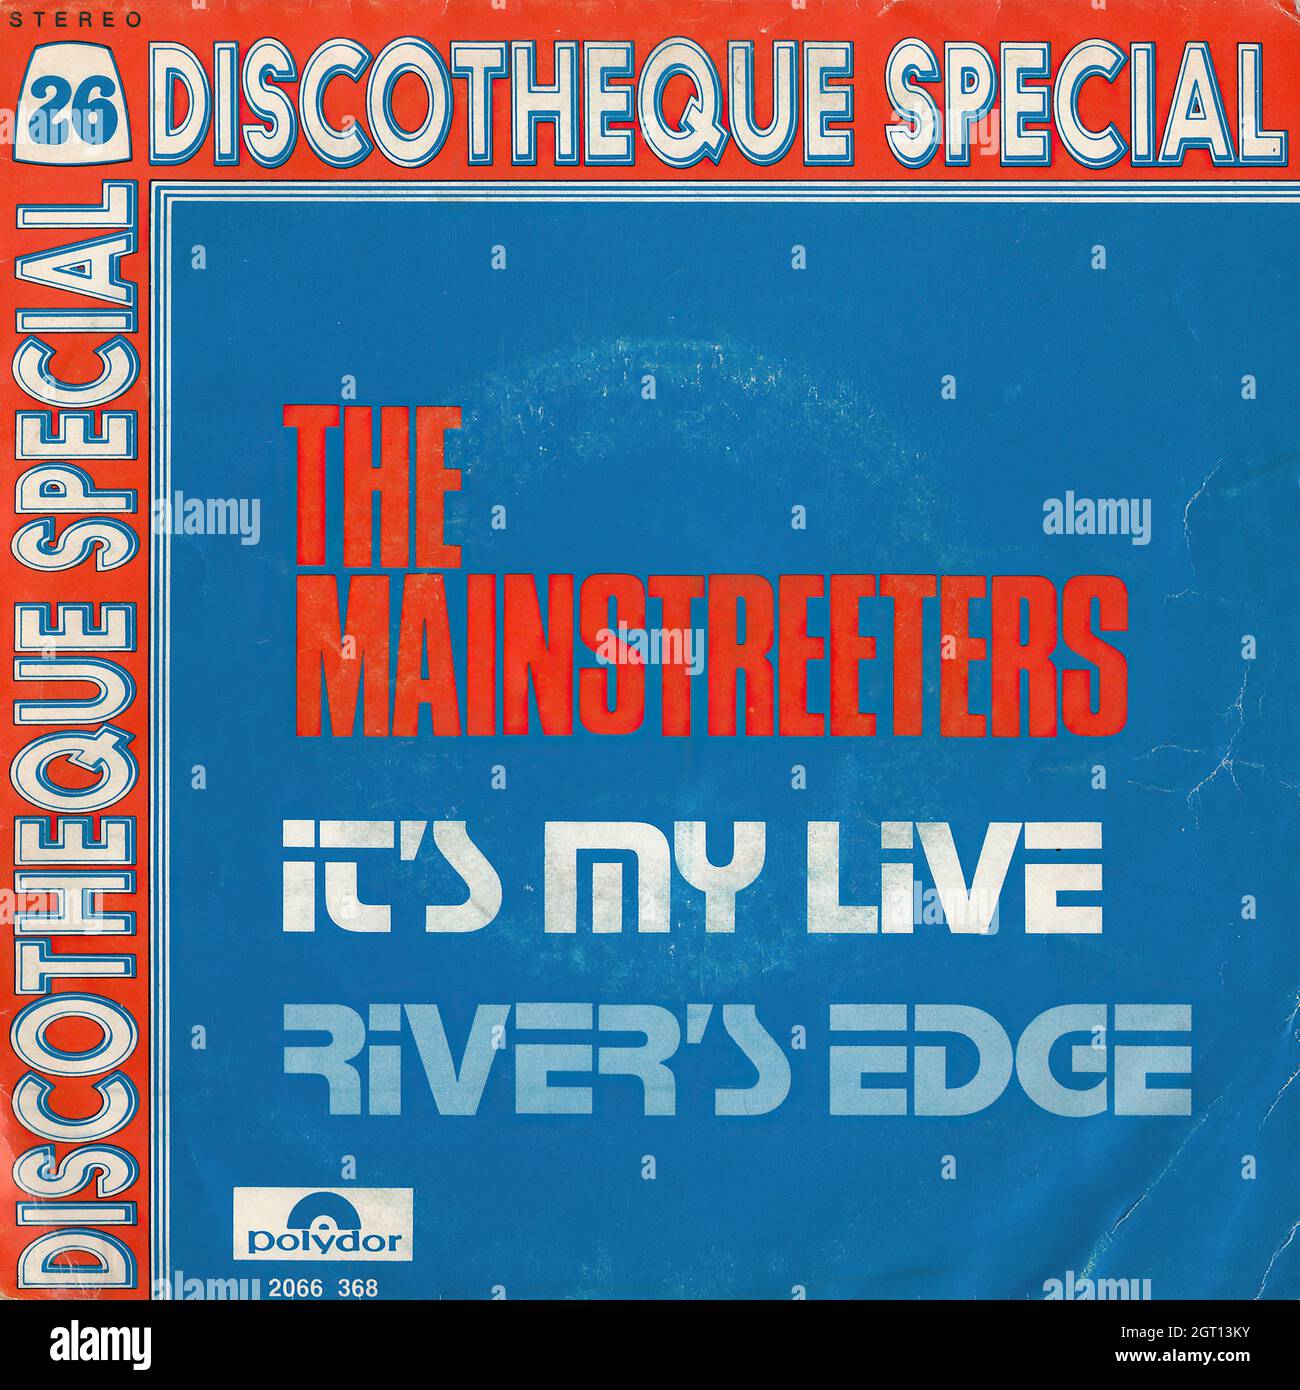 The Mainstreeters - It's my live (life) - River's edge 45rpm - Vintage Vinyl Record Cover Stock Photo